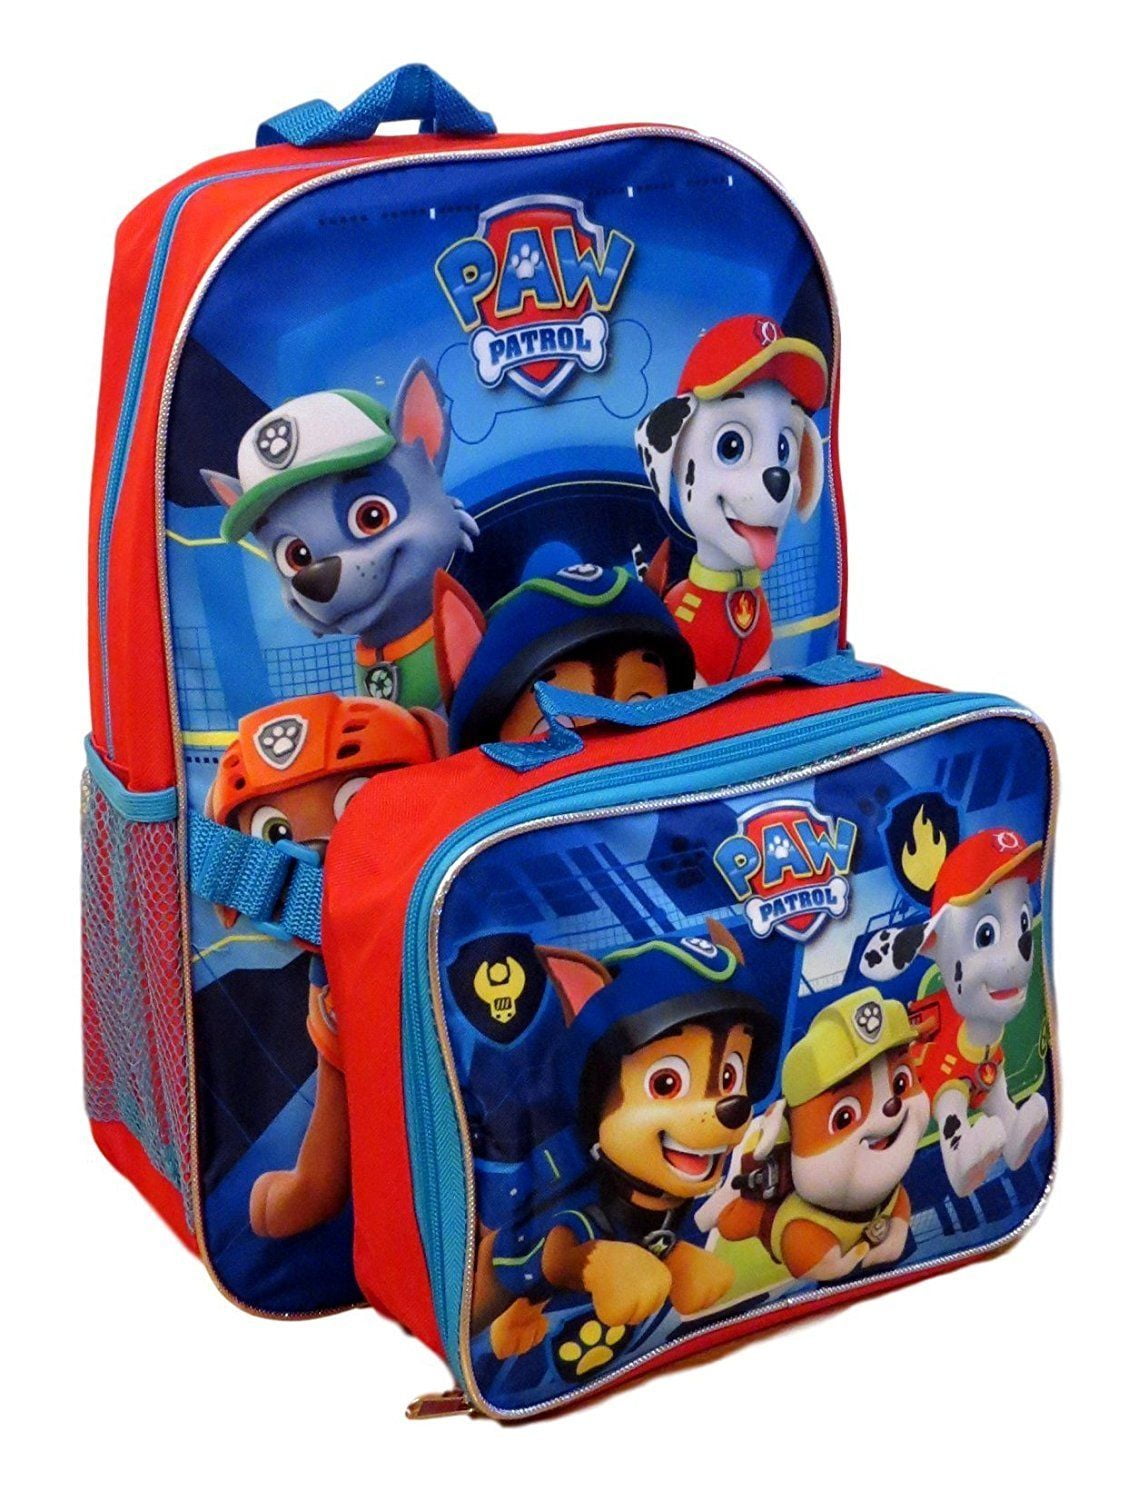 Nickelodeon Paw Patrol Backpack with Detachable Lunch Kit - Walmart.com